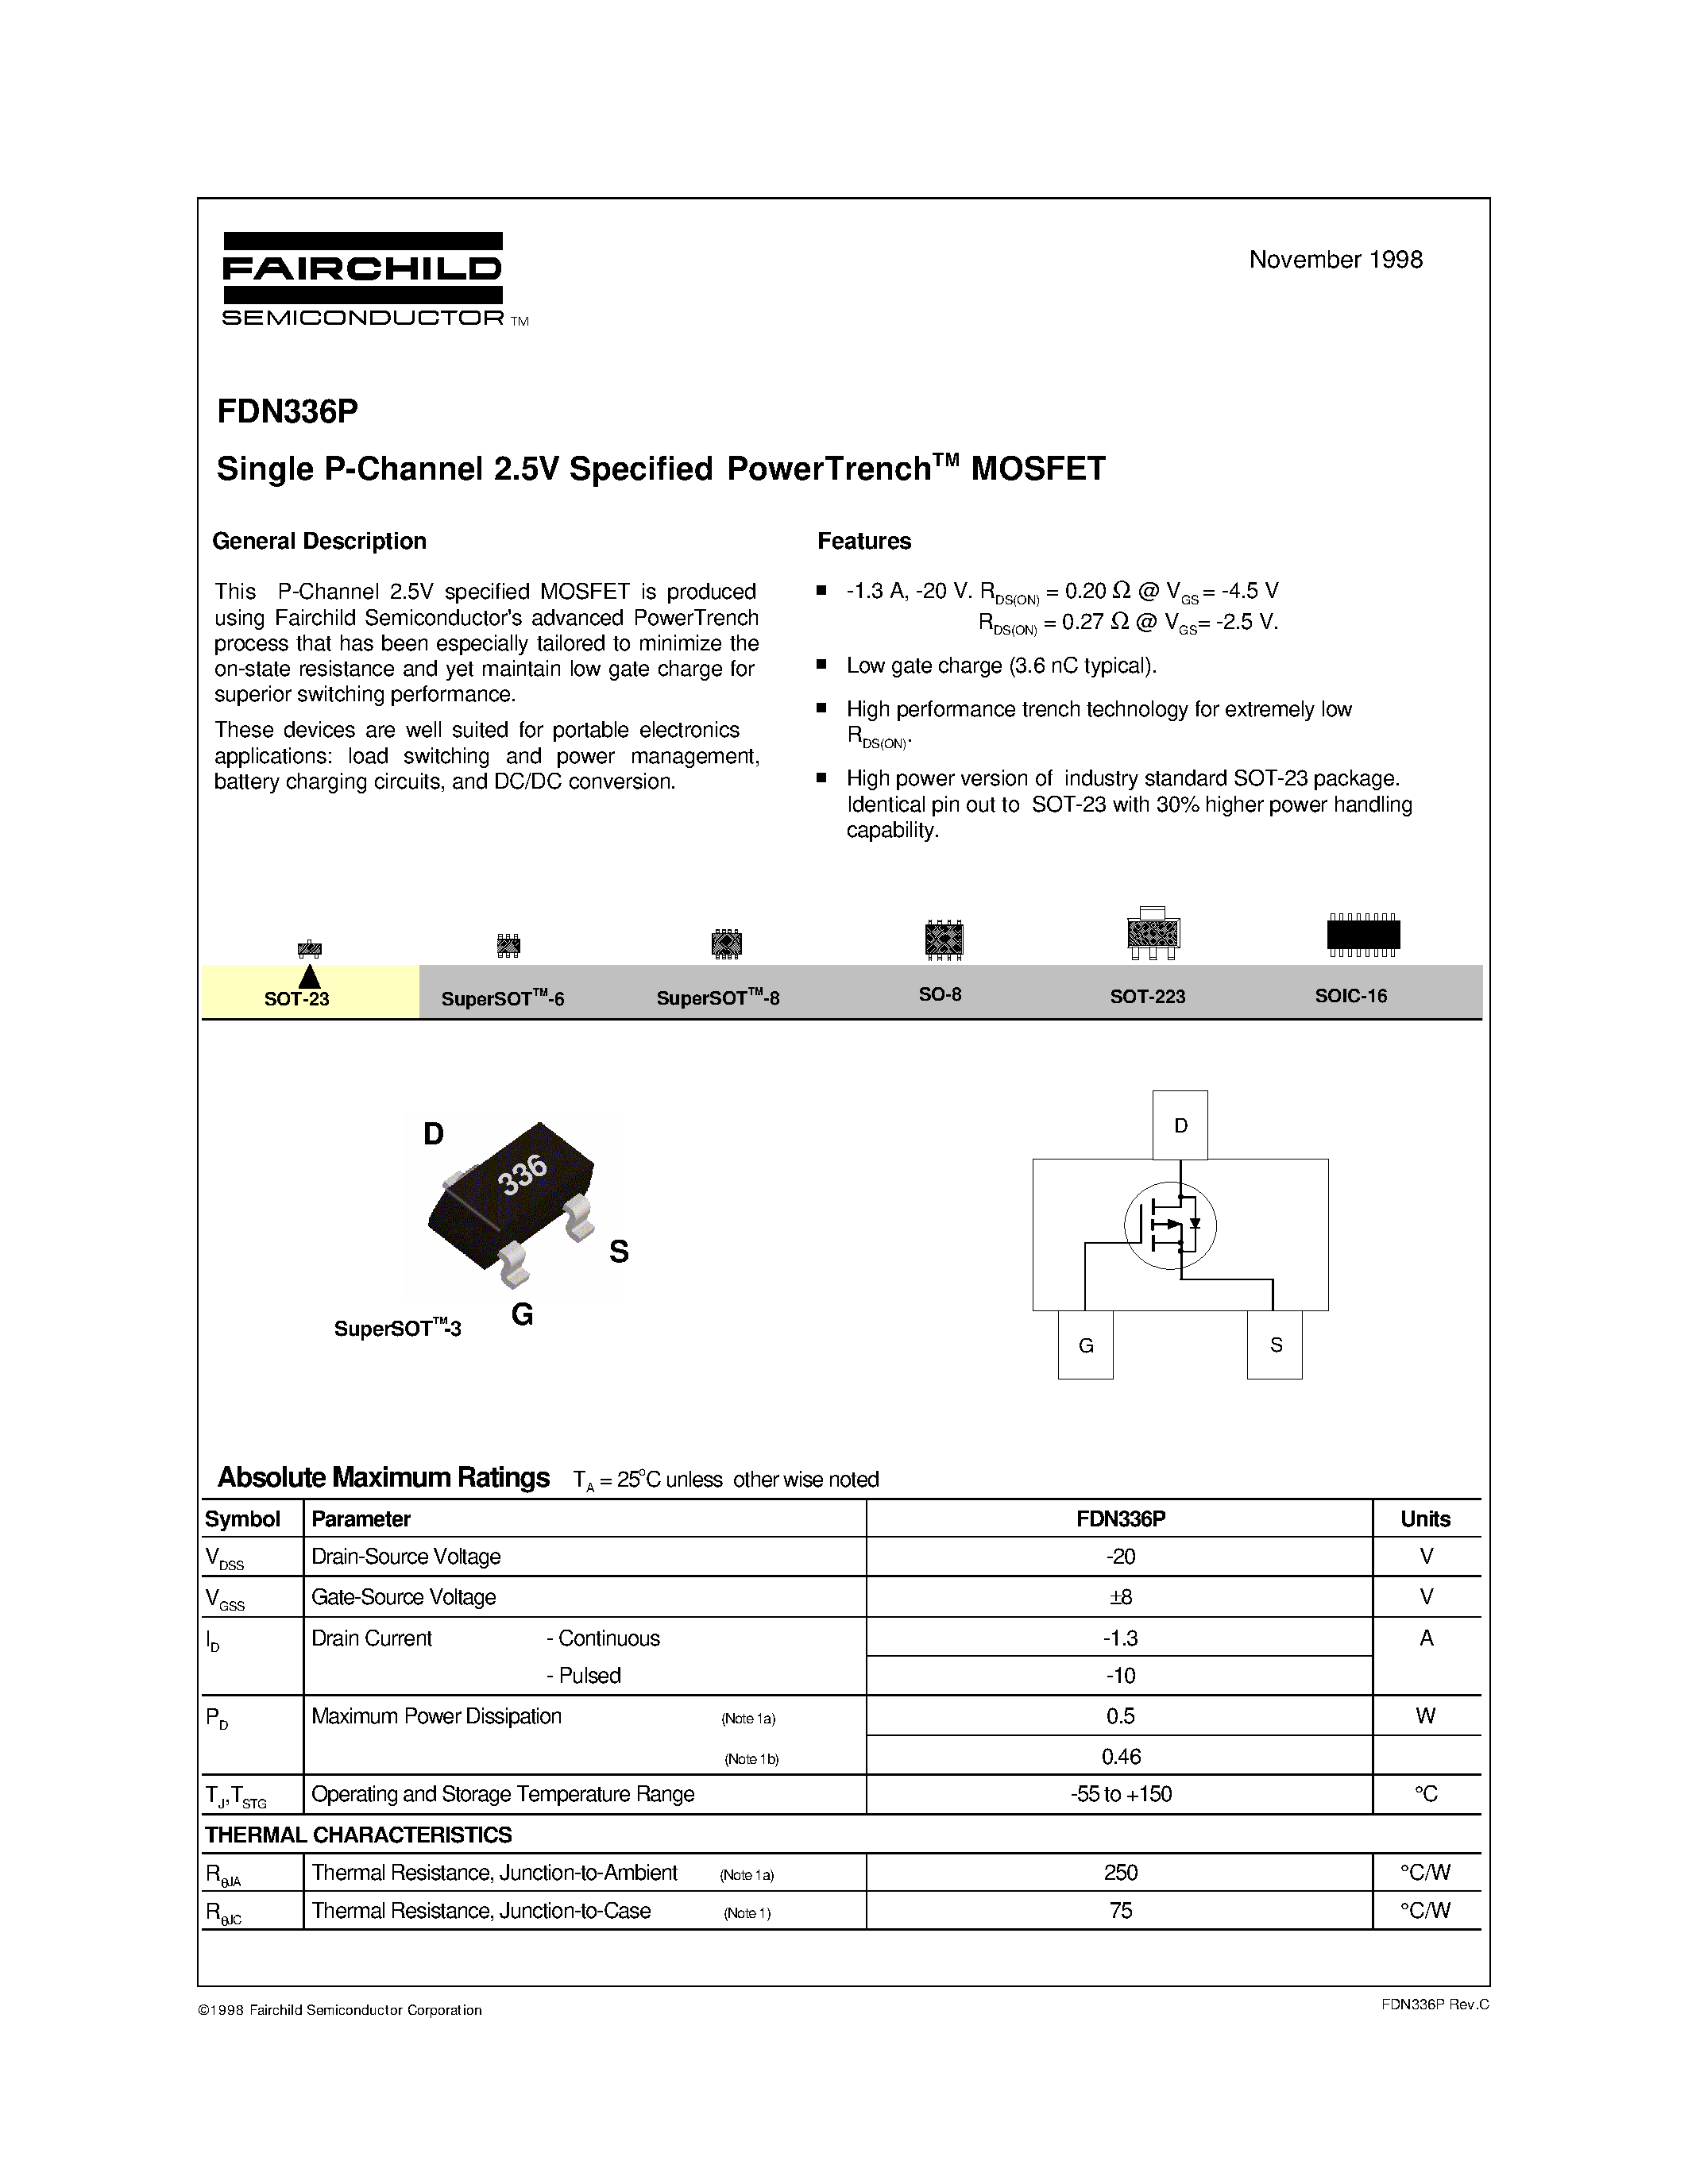 Даташит FDN336-Single P-Channel 2.5V Specified PowerTrenchTM MOSFET страница 1